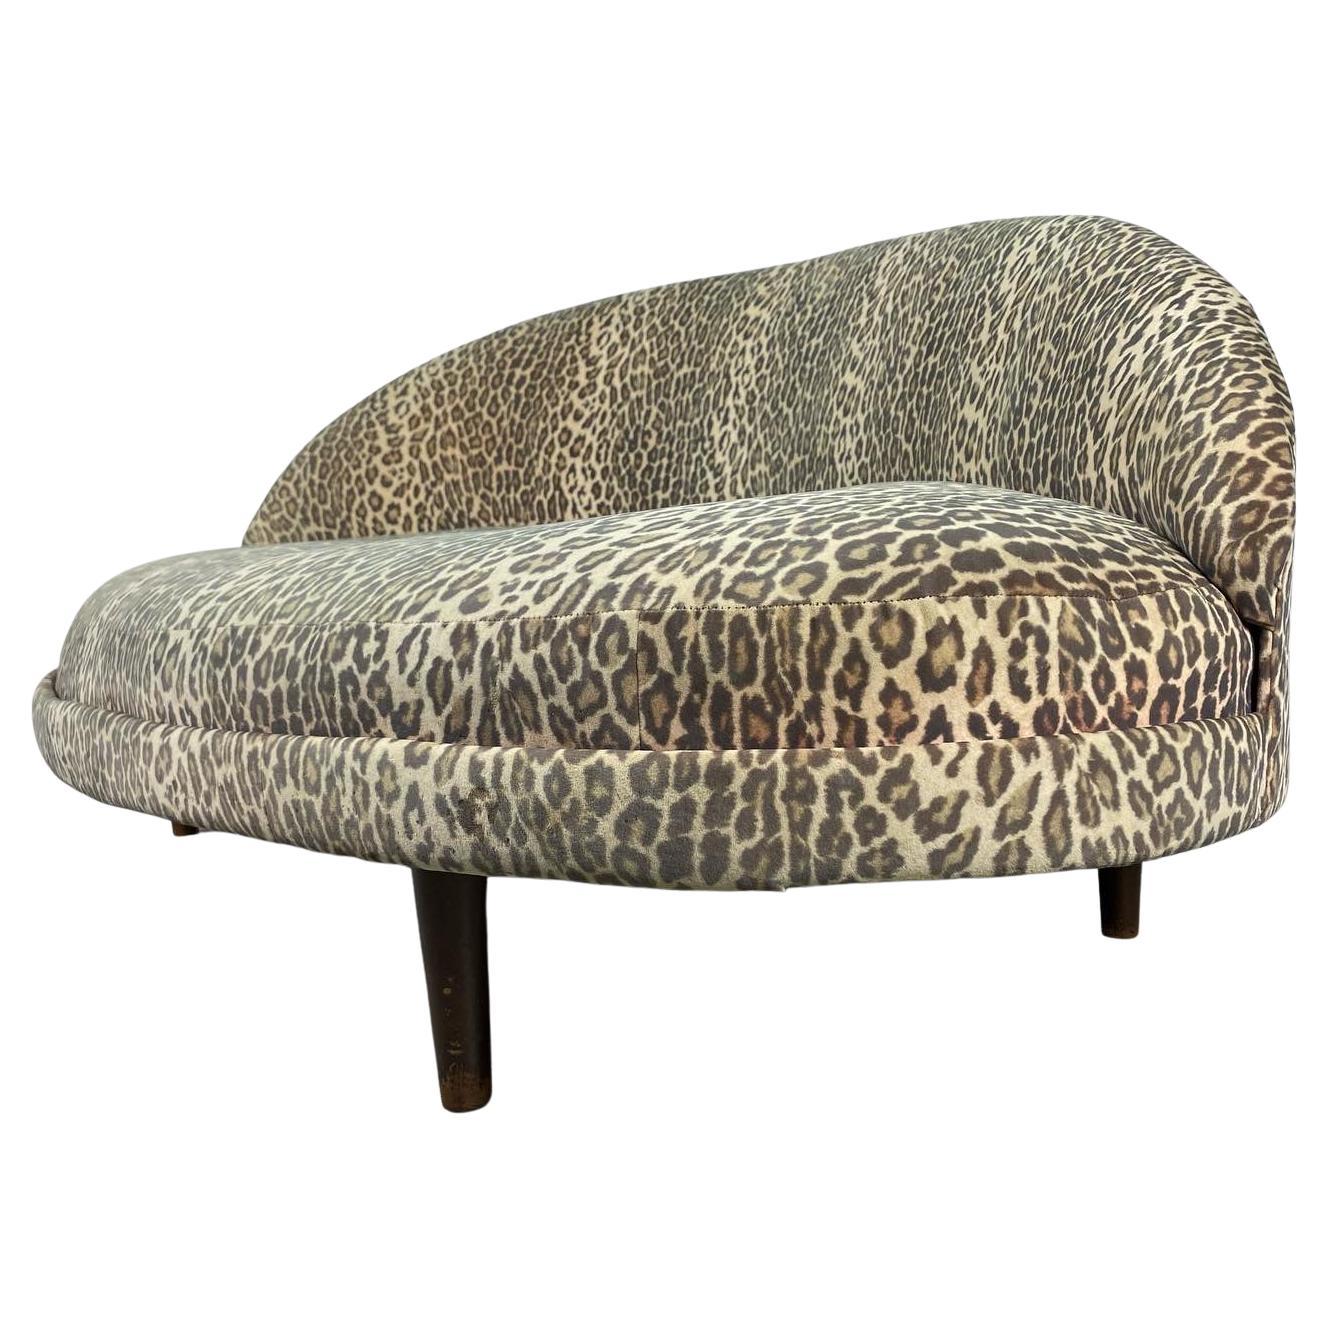 Stunning Leopard Oval Chaise Lounge by Adrian Pearsall / Craft Associates  For Sale at 1stDibs